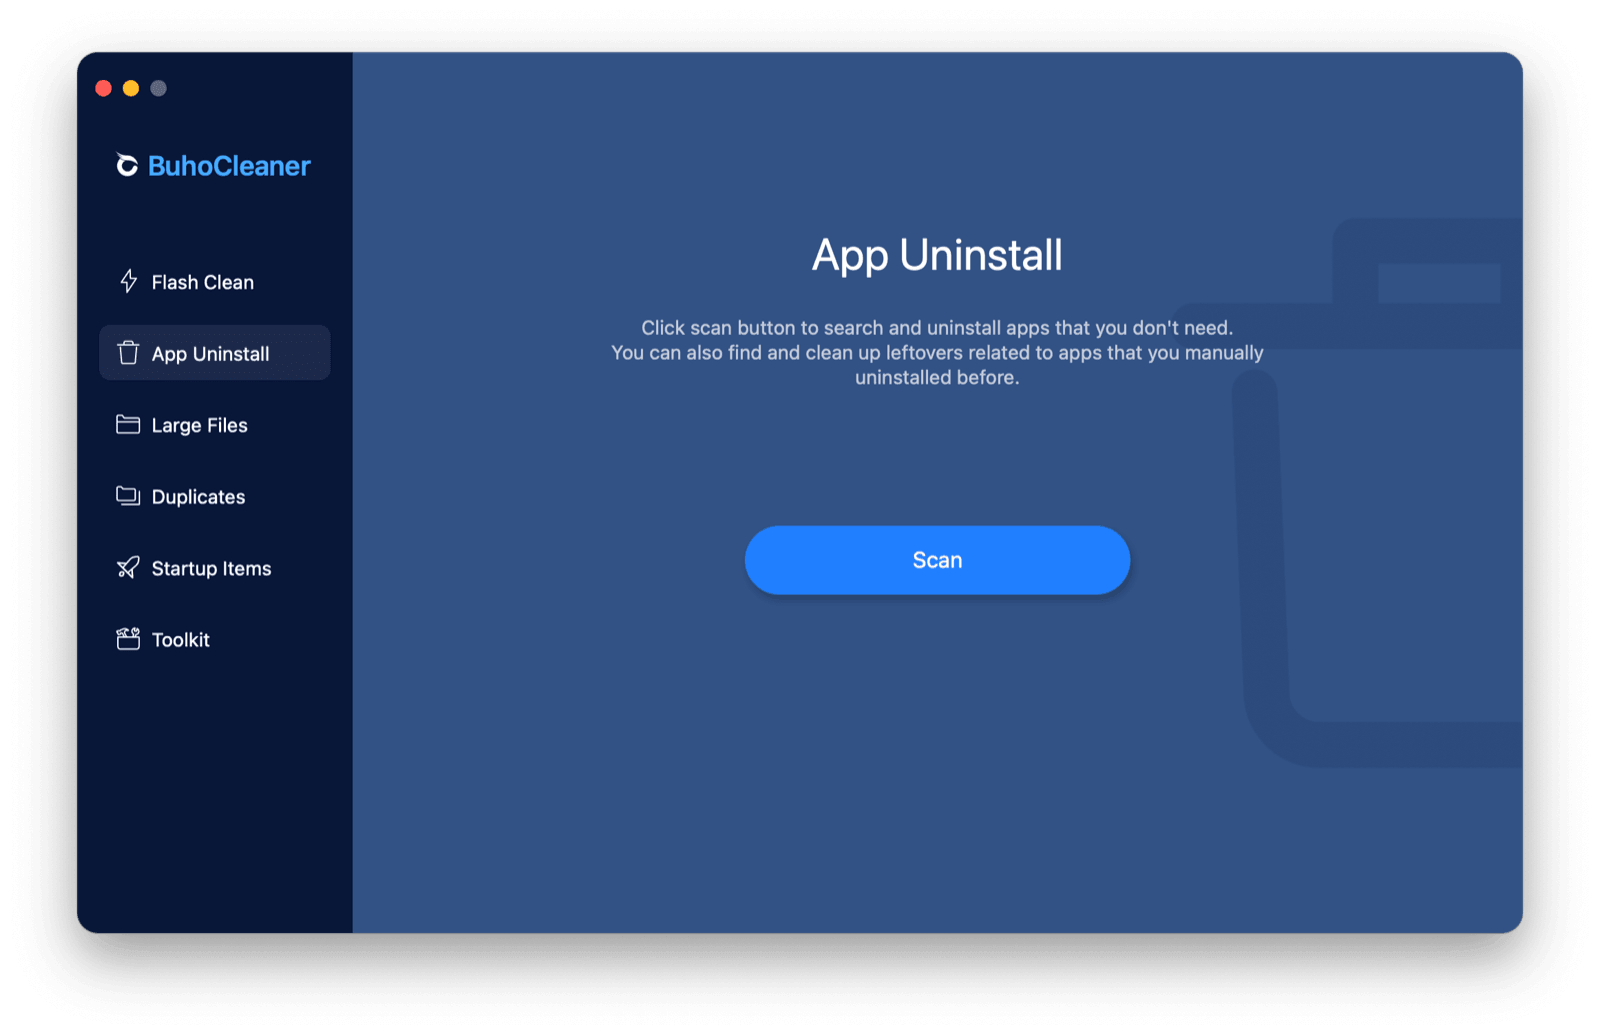 How to Uninstall Apps with BuhoCleaner